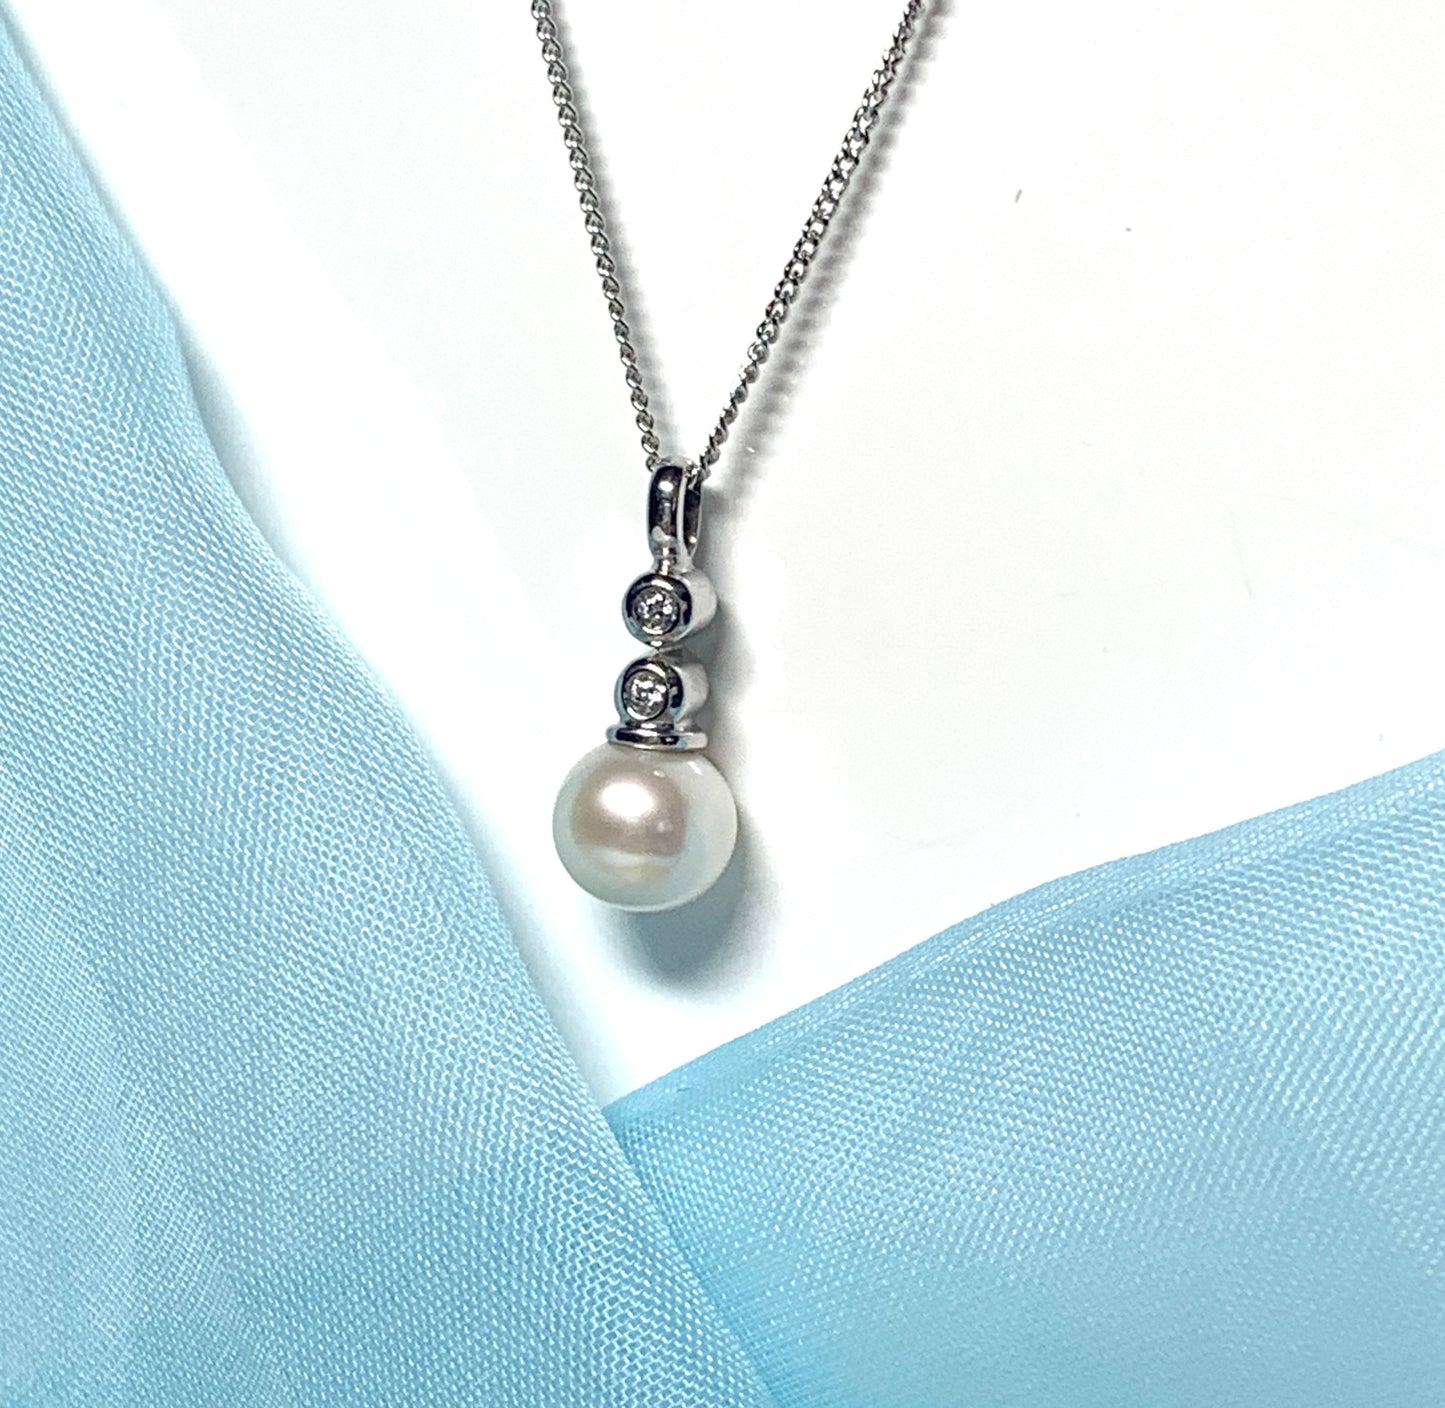 Pearl necklace freshwater cultured cubic zirconia white gold pendant